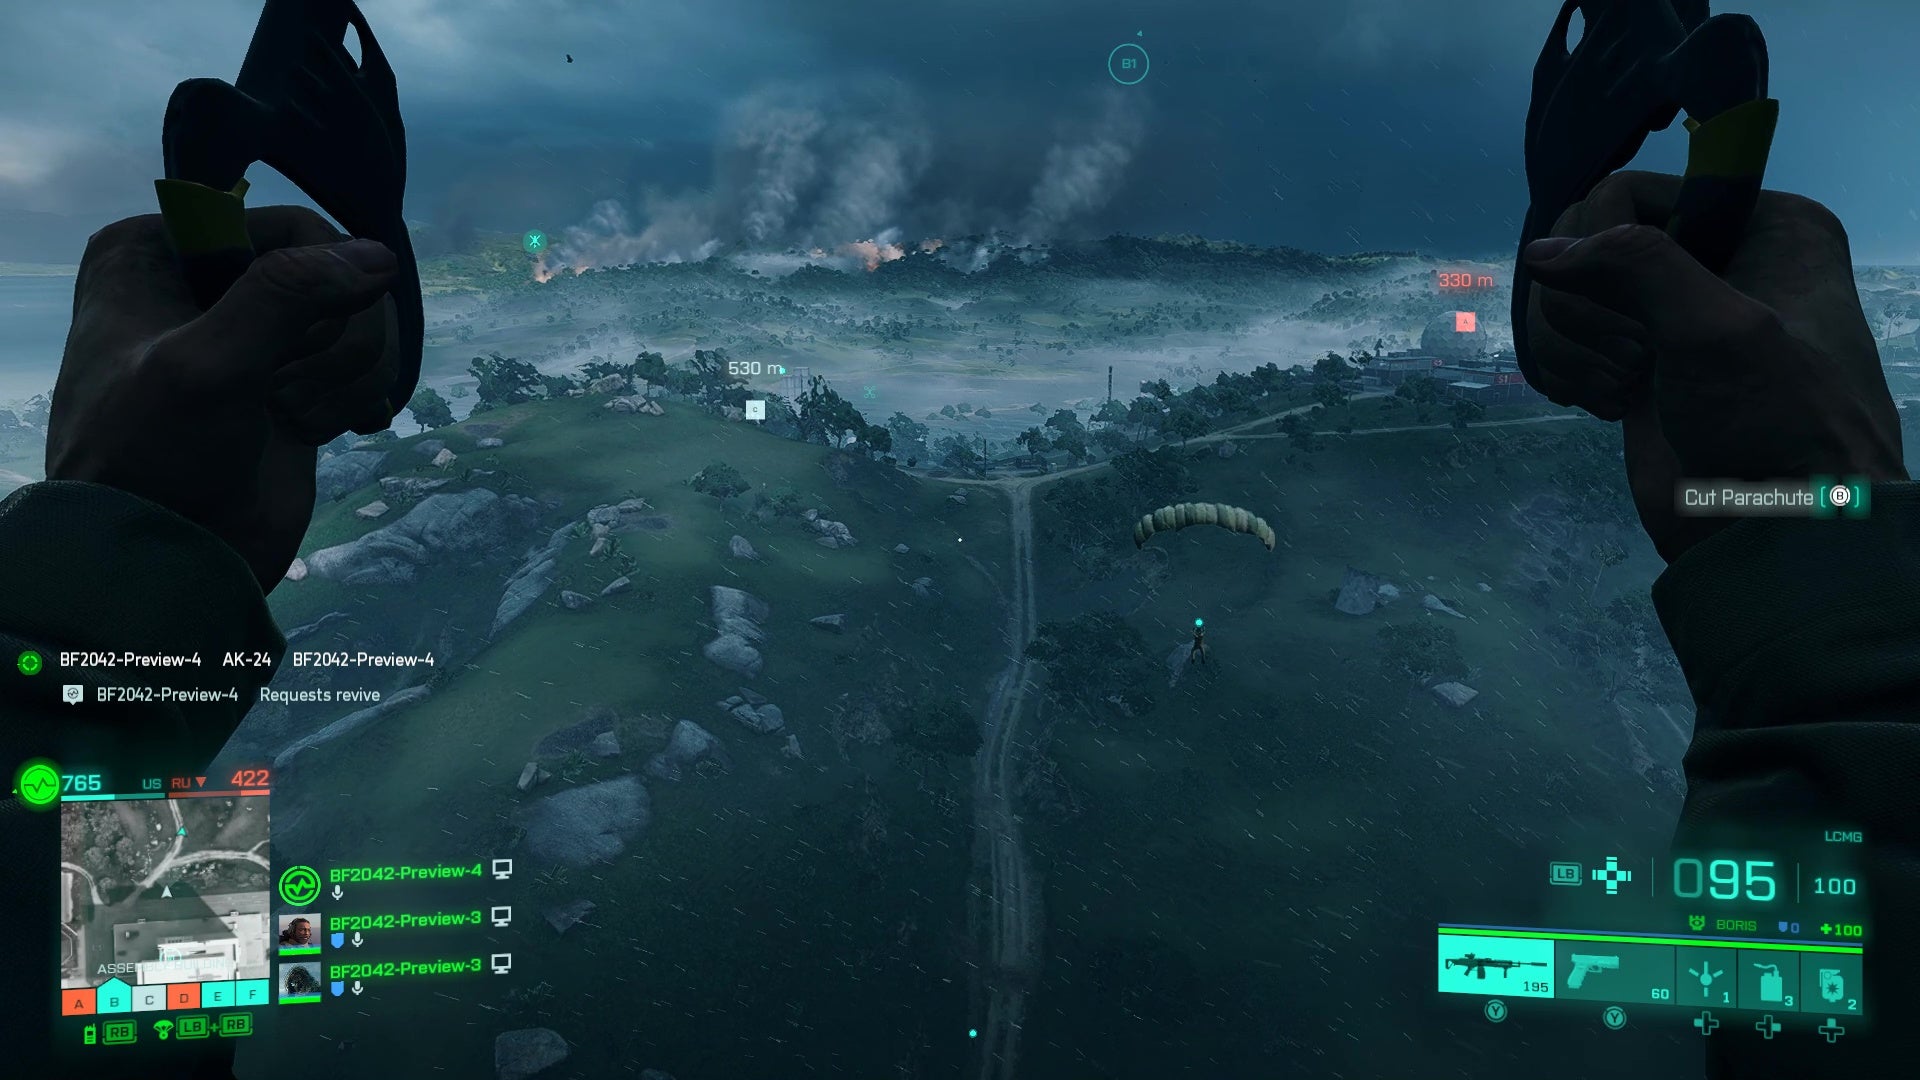 A player parachutes into the woods during a storm in Battlefield 2042.